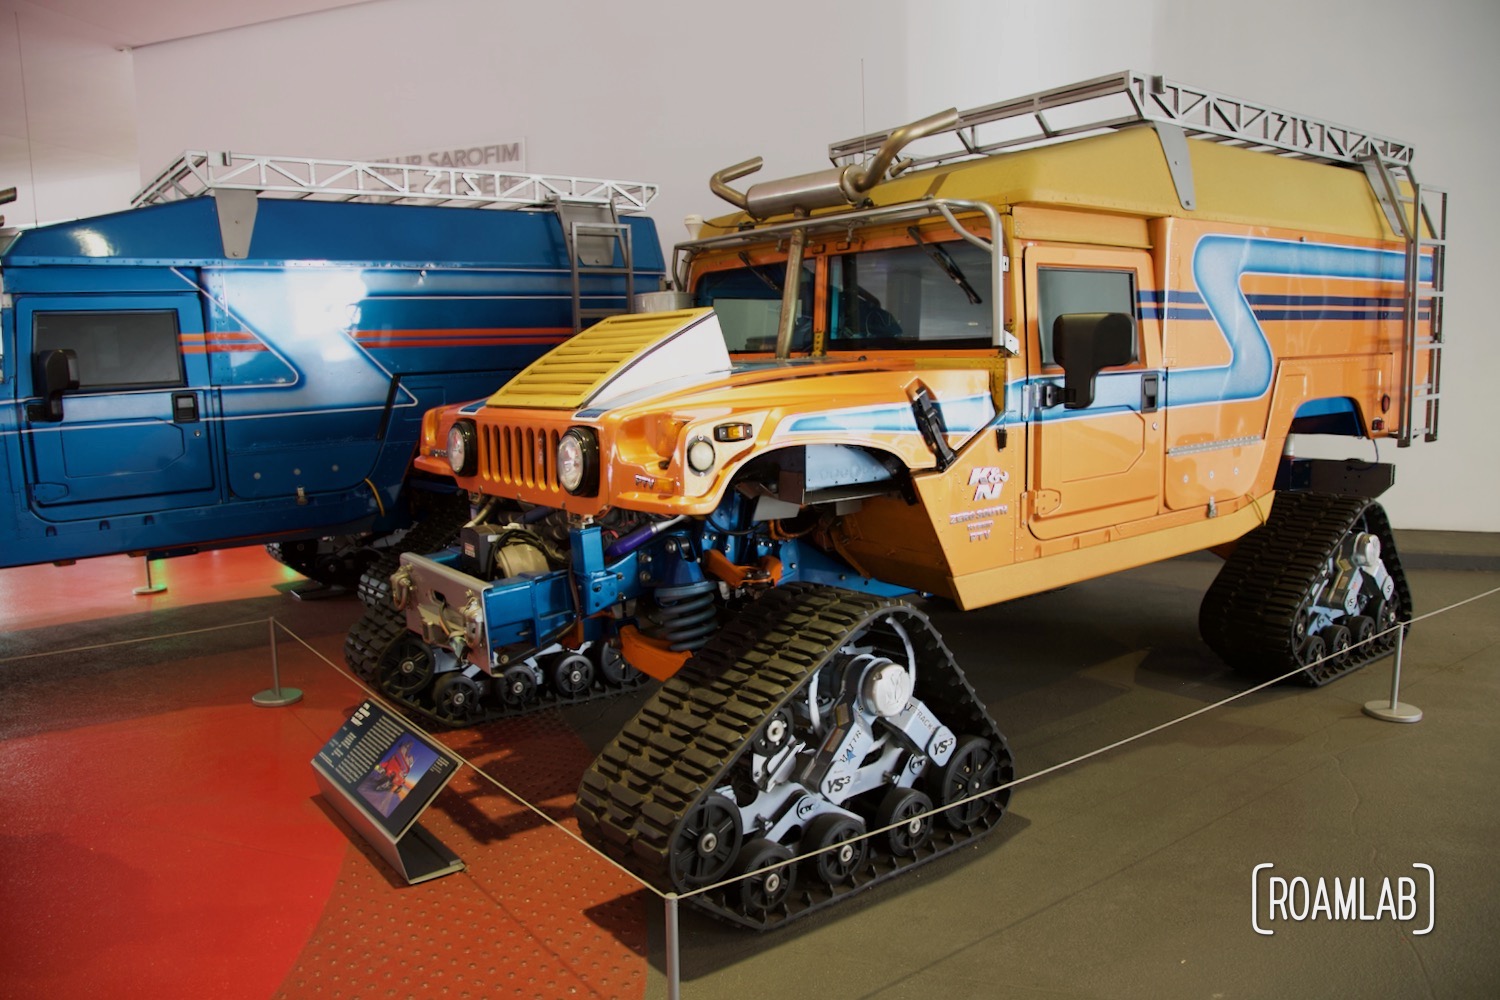 1996 Hummer H1 PTV "Buddy1" on display at the Petersen Automotive Museum